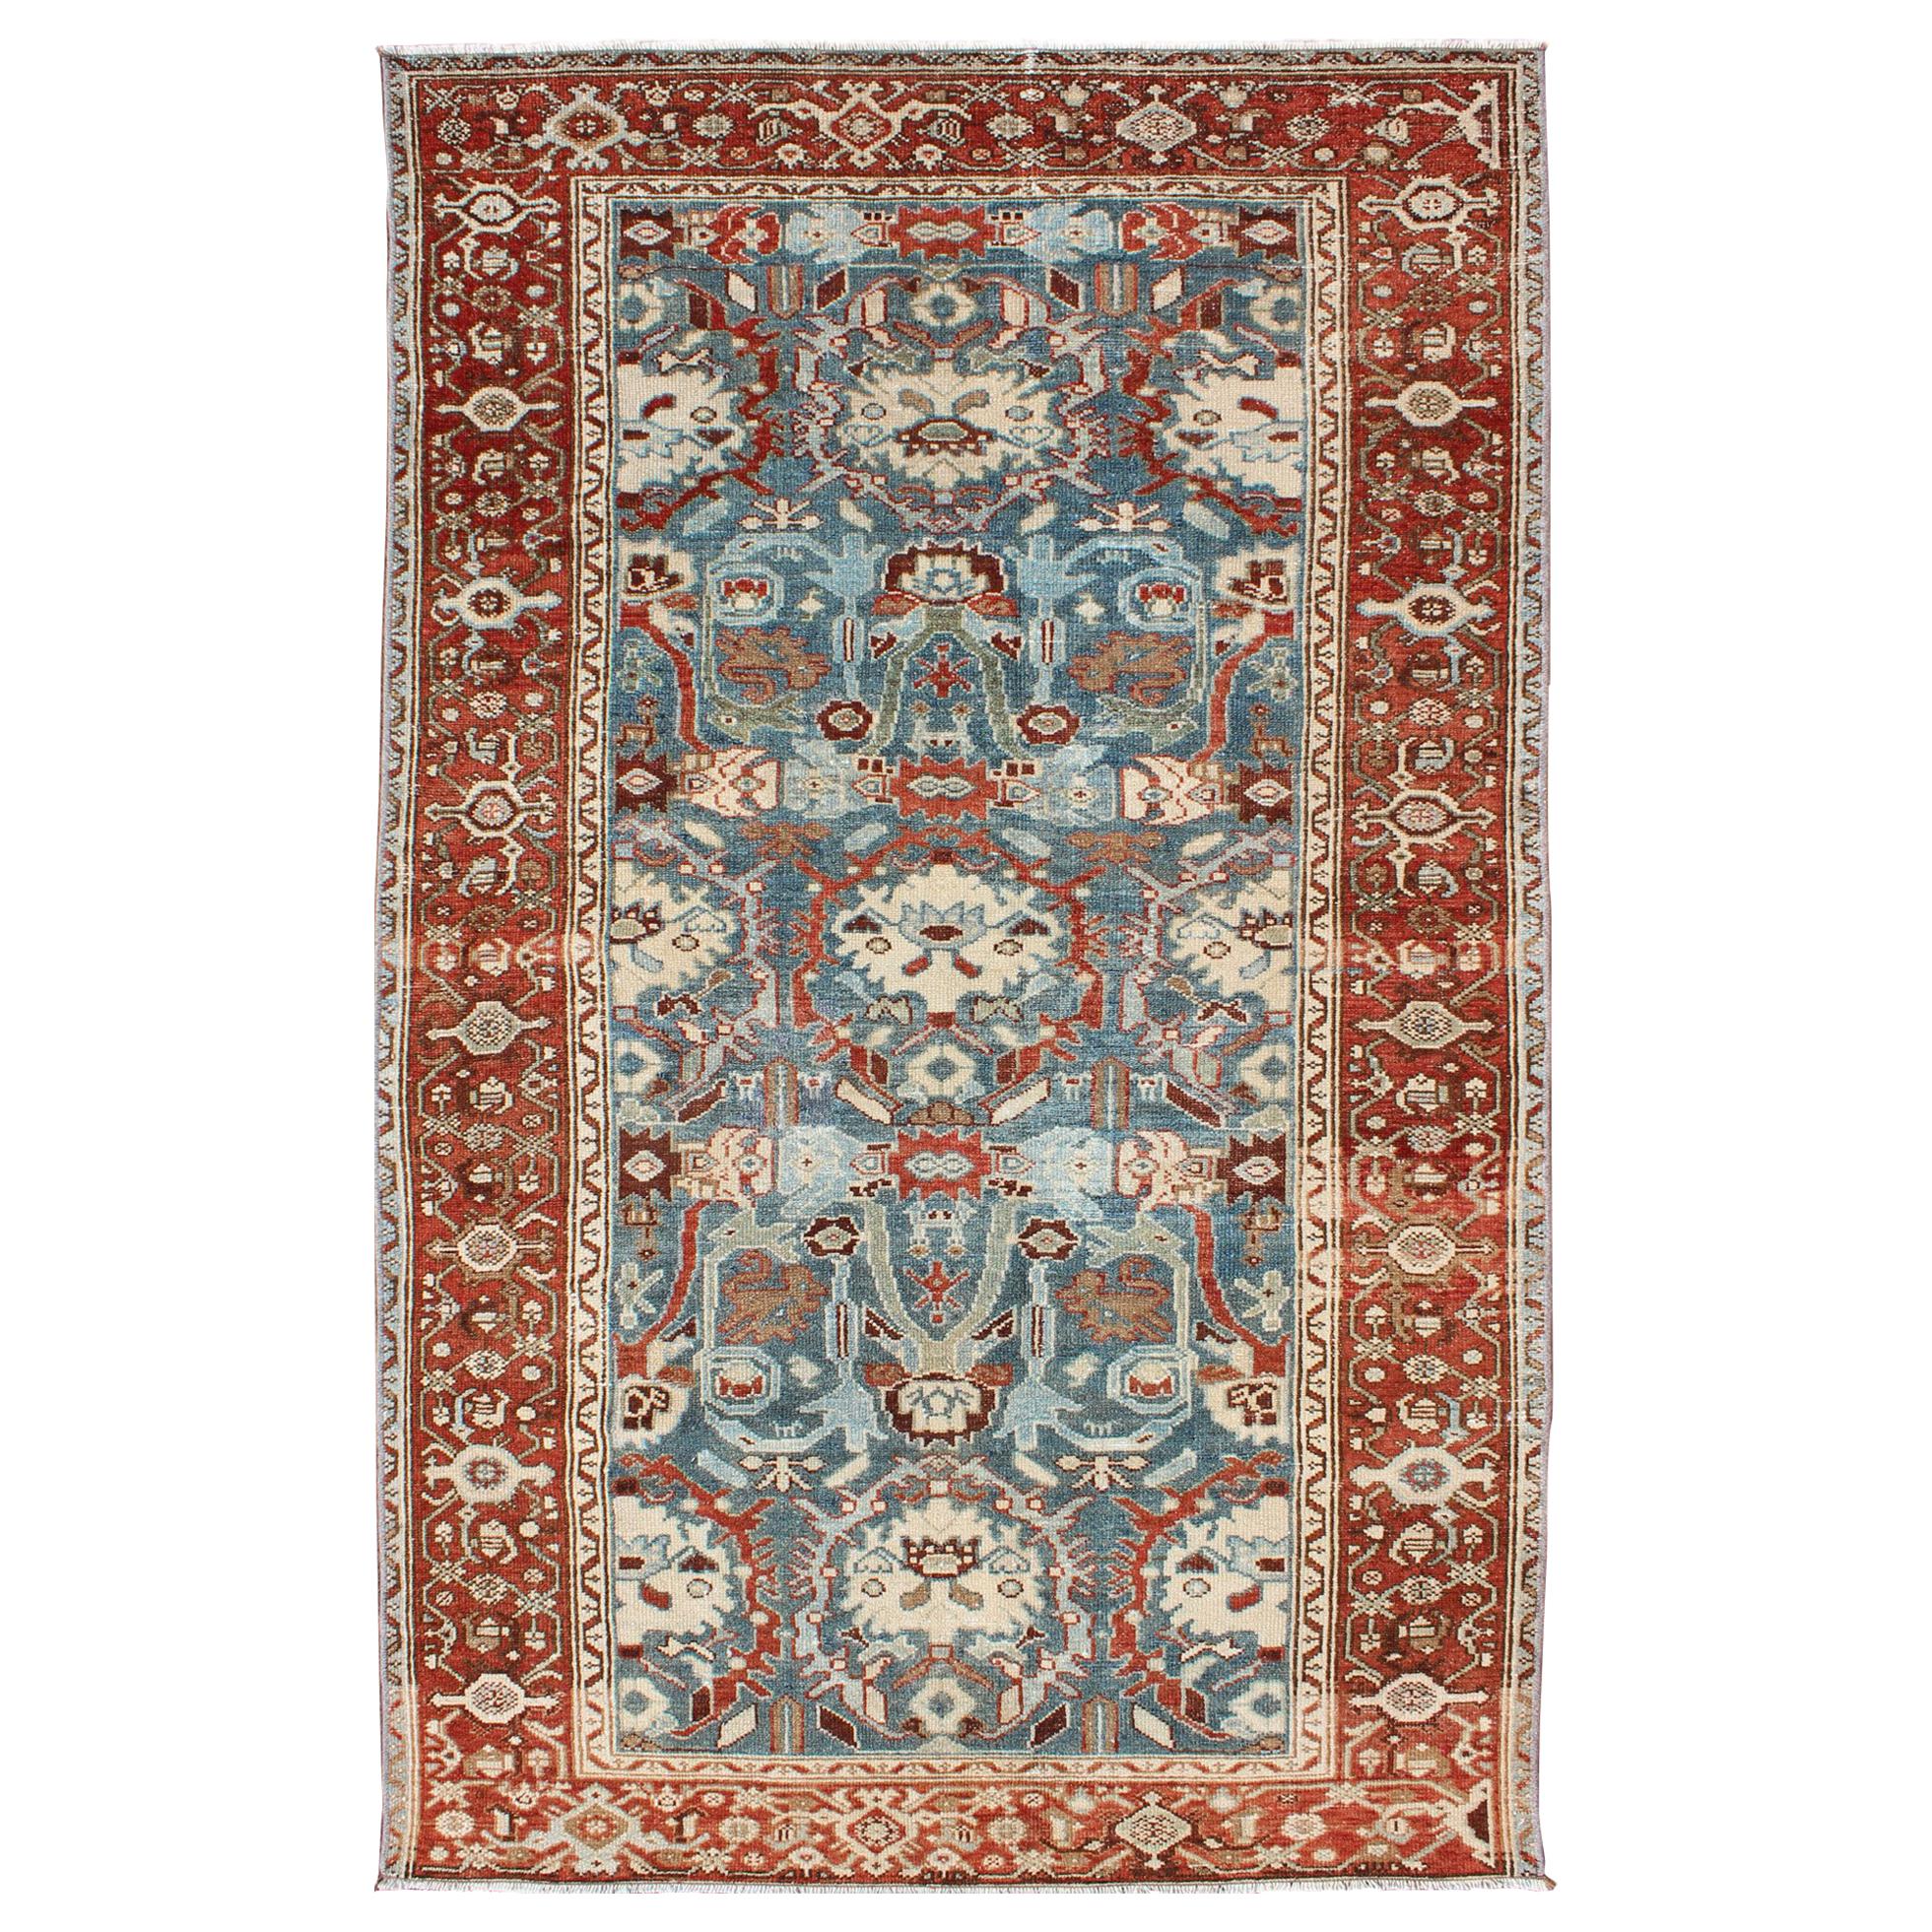 Colorful Antique Persian Malayer Rug with Expansive Blossom Design